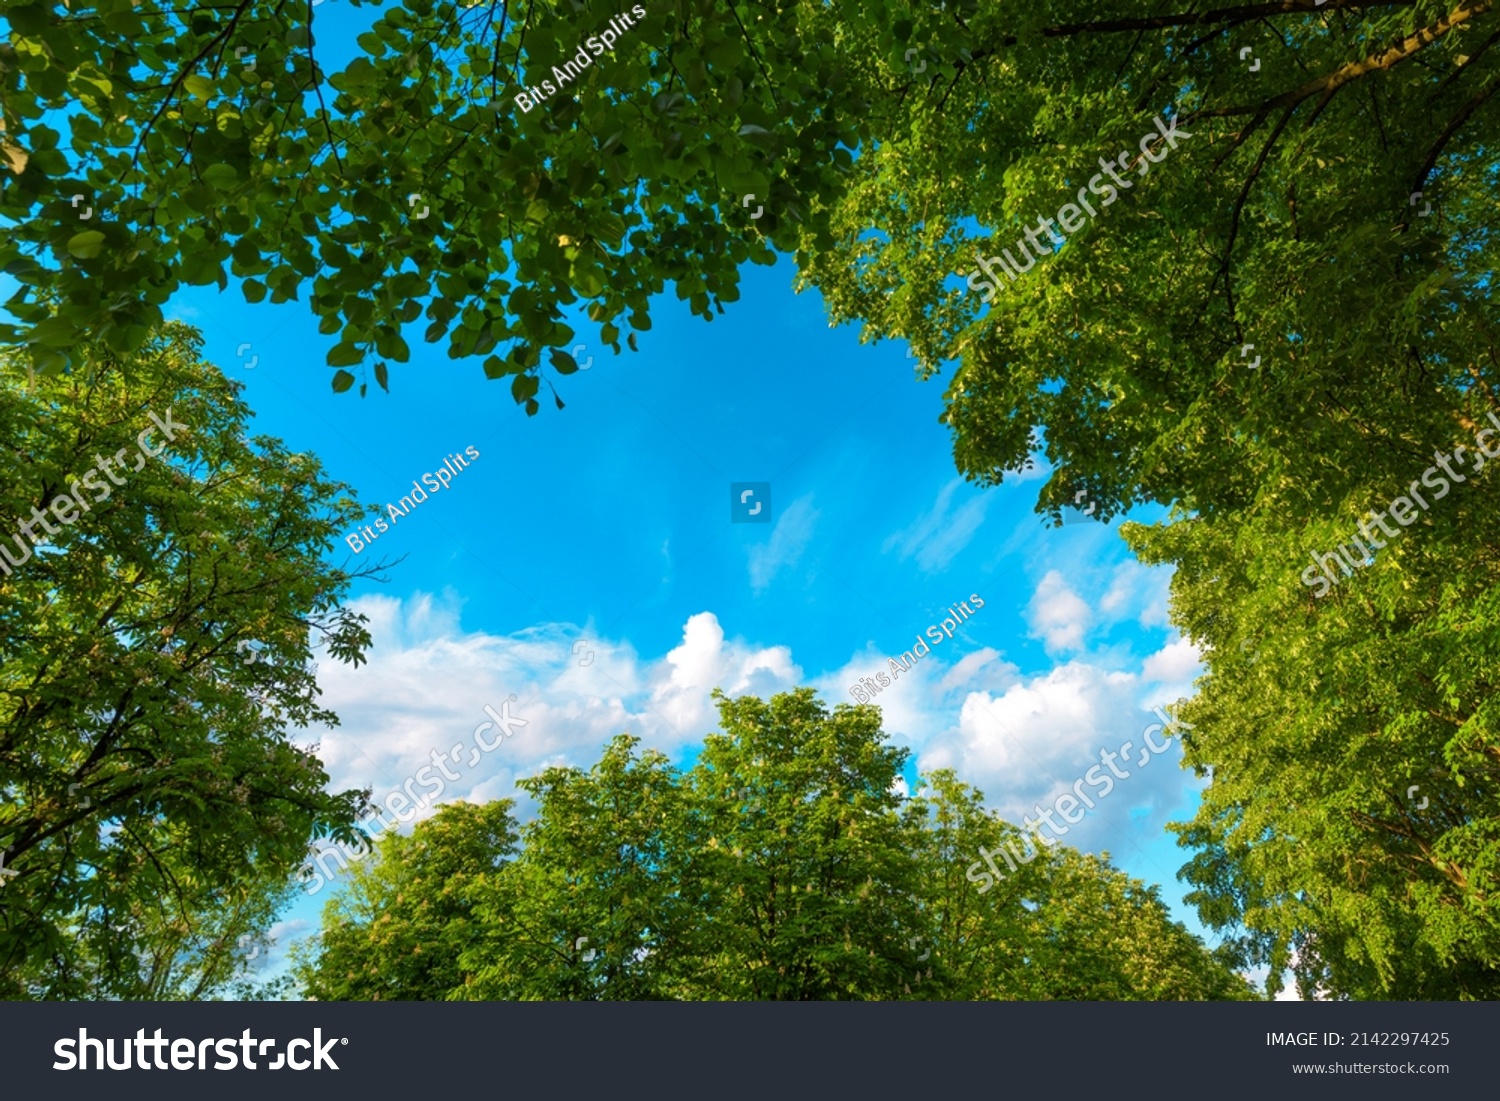 View of blue sky through green treetops, springtime season background, low angle view #2142297425